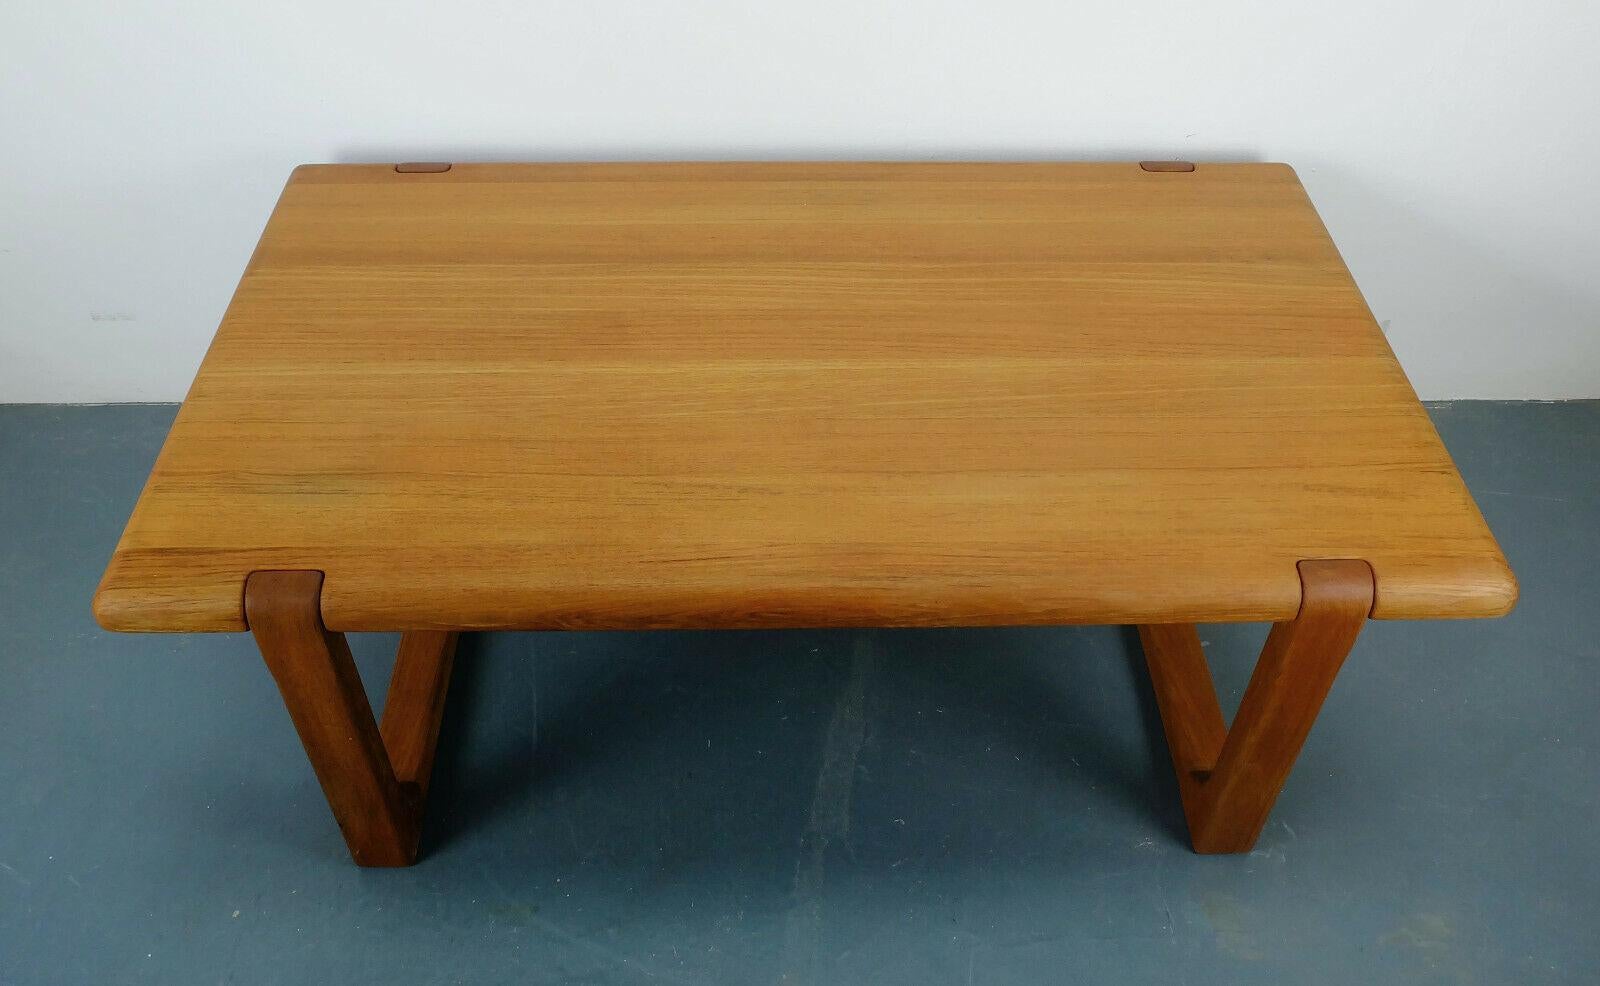 Midcentury coffee table, designed by Niels Bach, made in Denmark. Solid design, yet elegant appearance. Plate and frame solid teak with beautiful grain. Signedz 